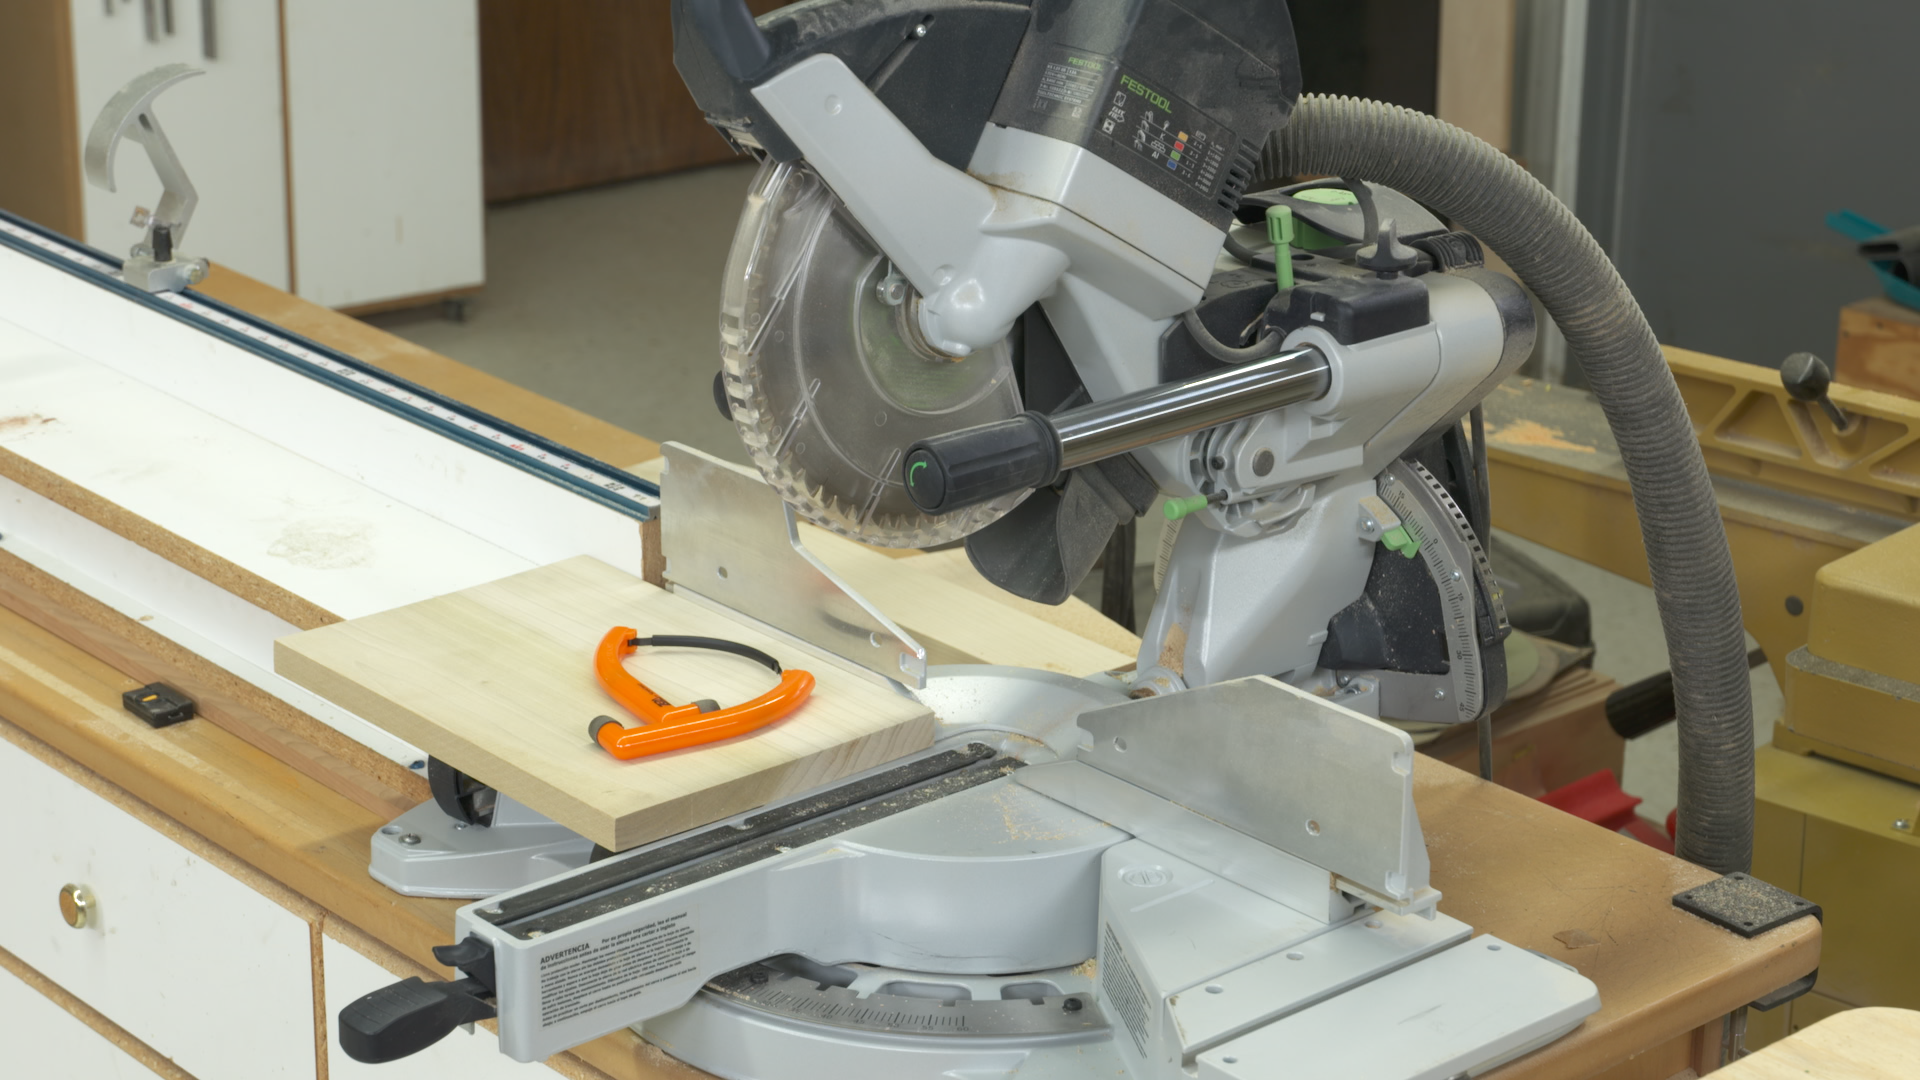 Using a Miter Saw Correctly product featured image thumbnail.